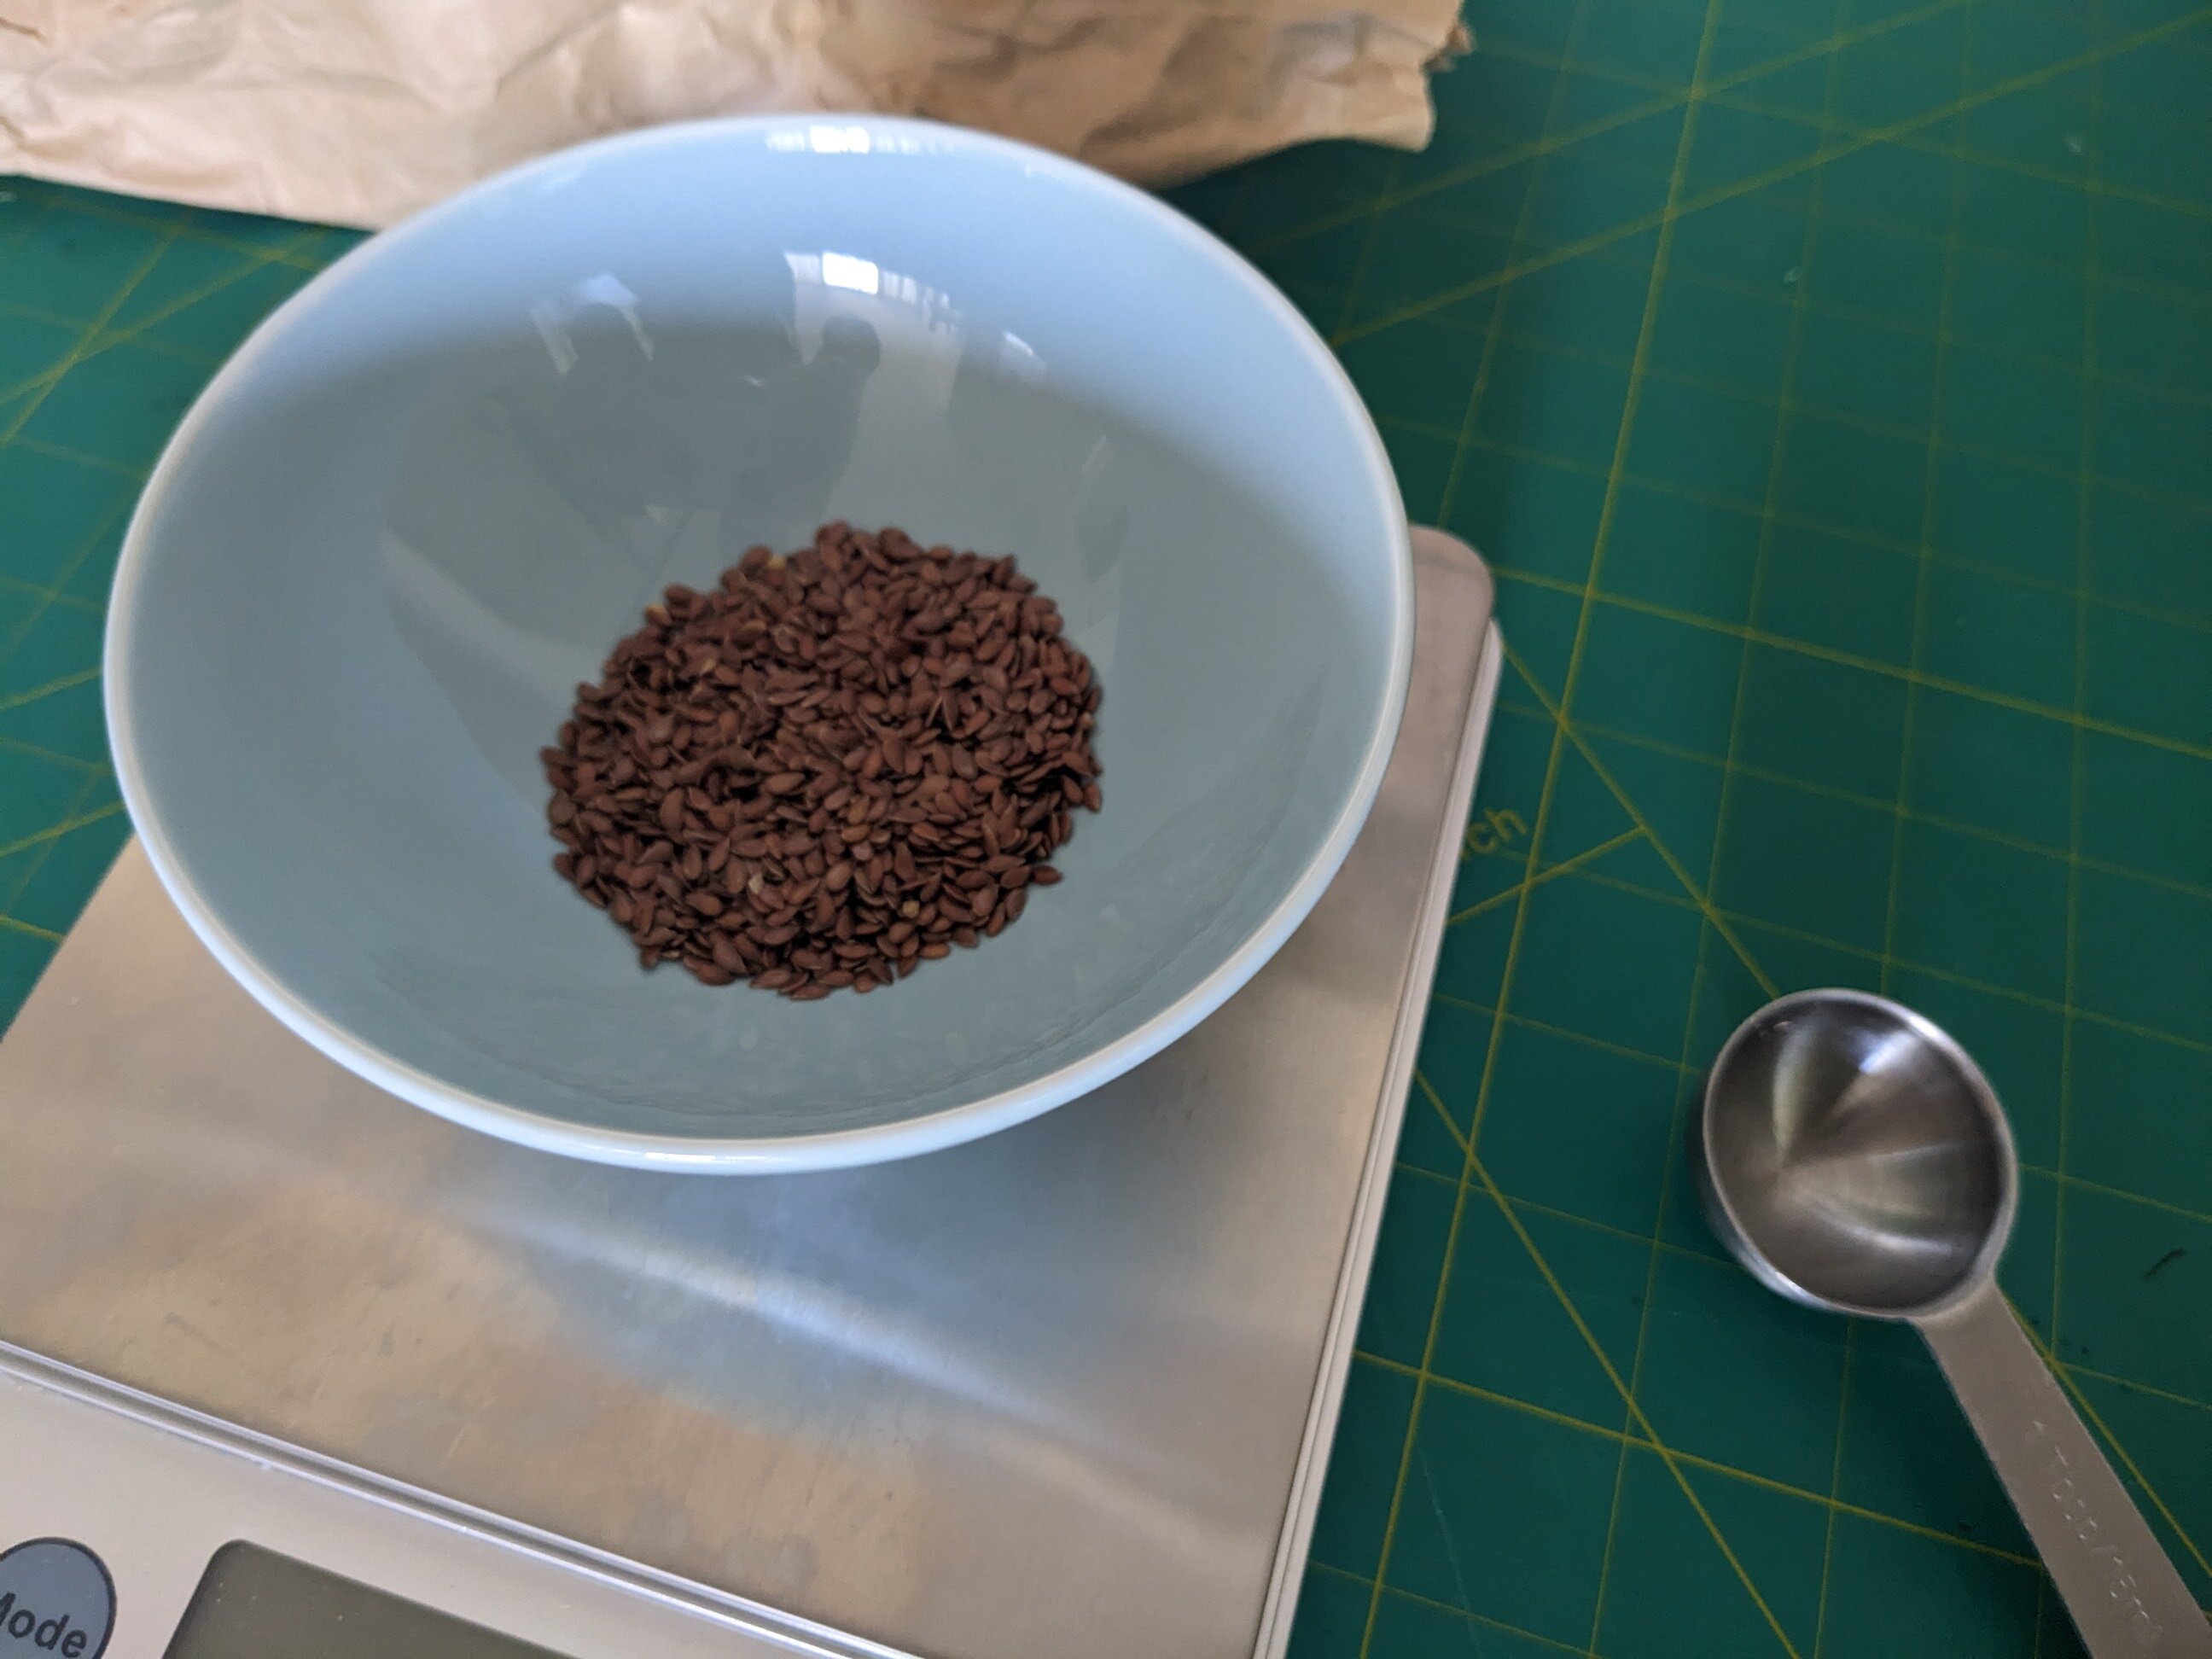 A tablespoon of brown flax seeds, in a light blue dish, on a kitchen scale.